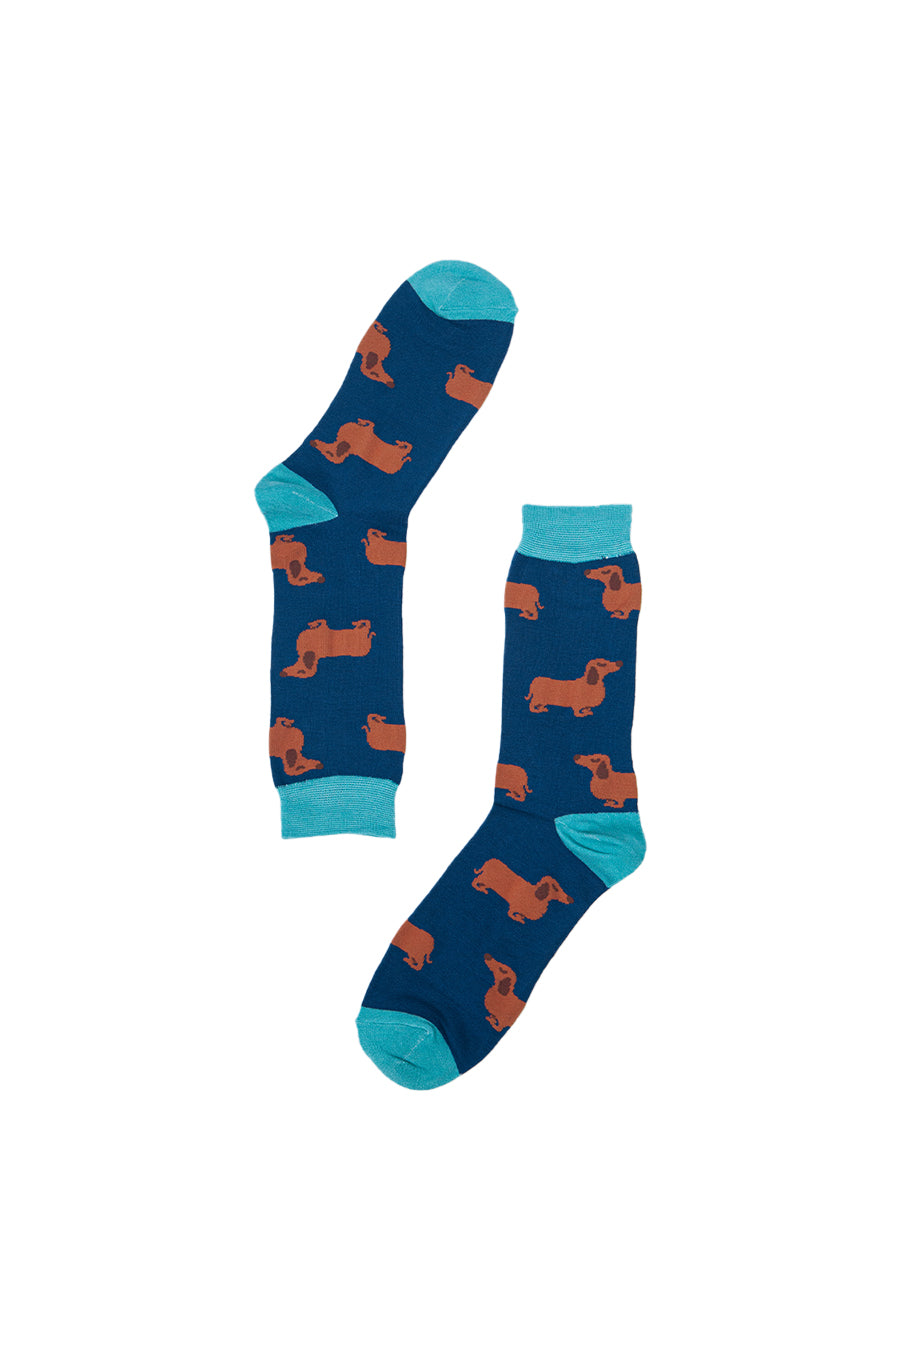 blue bamboo socks with sausage dogs on them